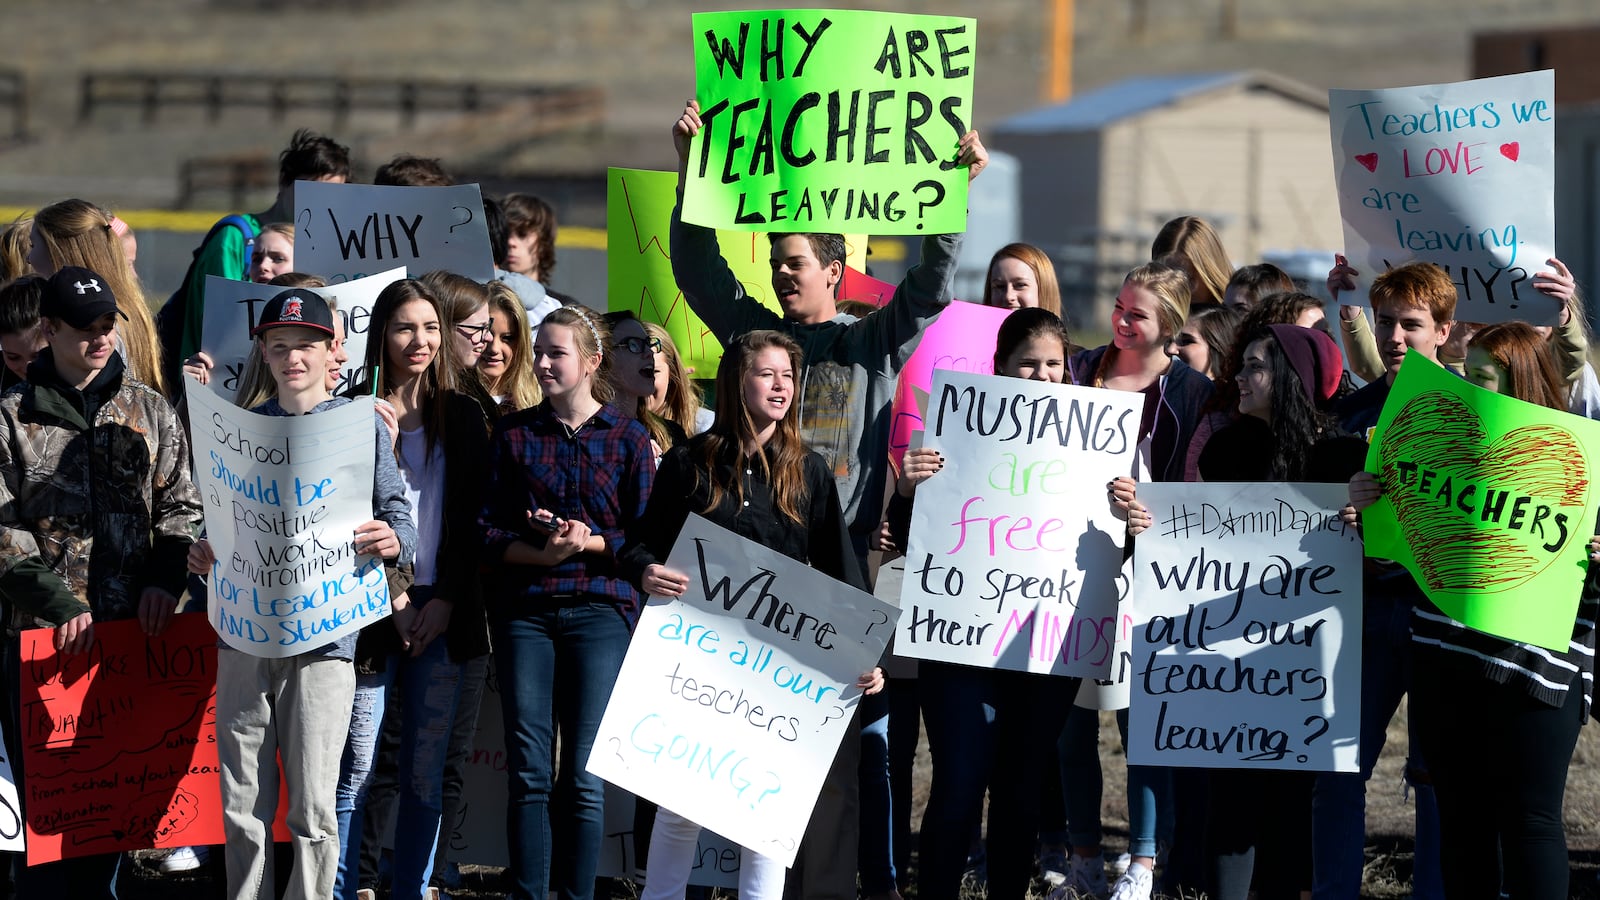 Ponderosa High School students in 2016 staged a walkout to protest what they say is a high teacher turnover rate caused decisions made by the Douglas County School District. (Photo by Andy Cross/The Denver Post)